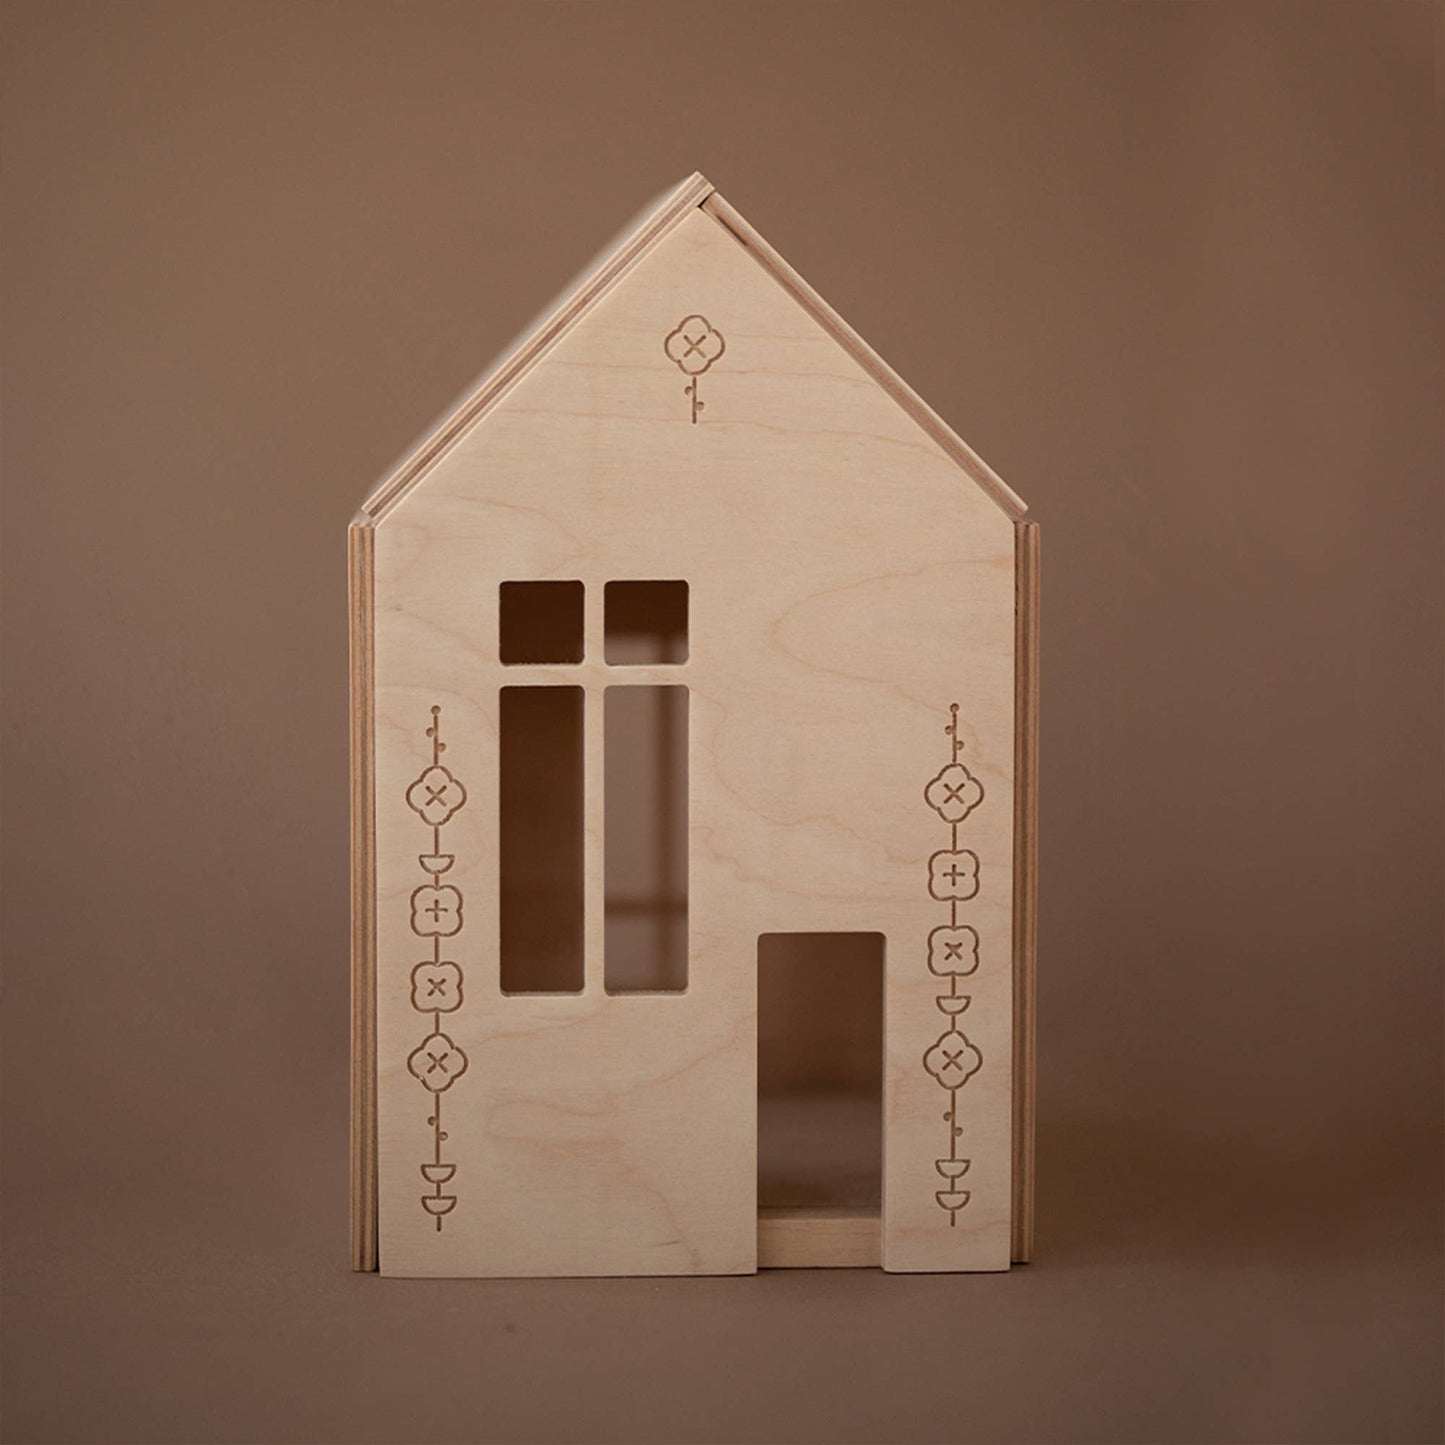 Babai Magnetic Dollhouse - Pink